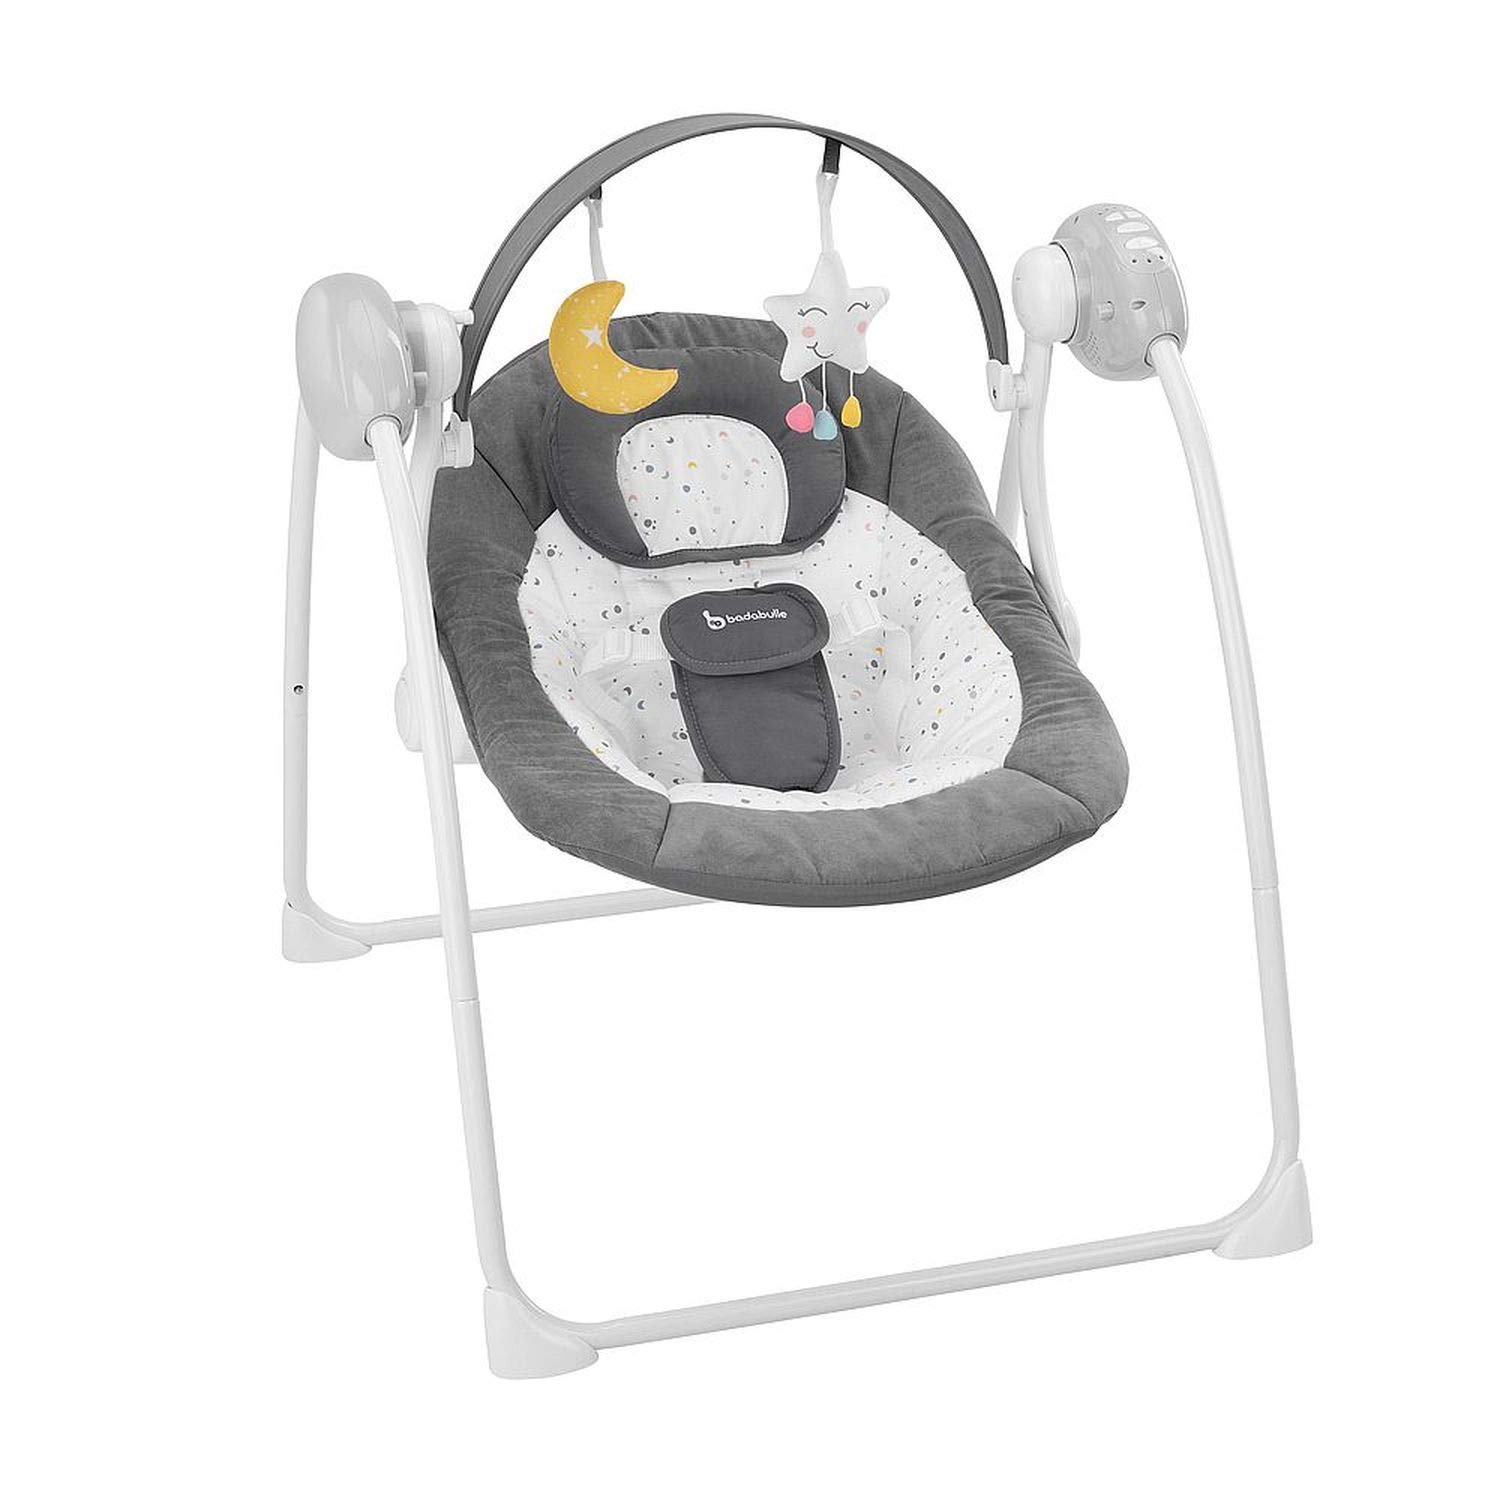 Badabulle Comfort Moonlight electric baby bouncer and baby swing, with 3 swing speeds, timer and 8 melodies